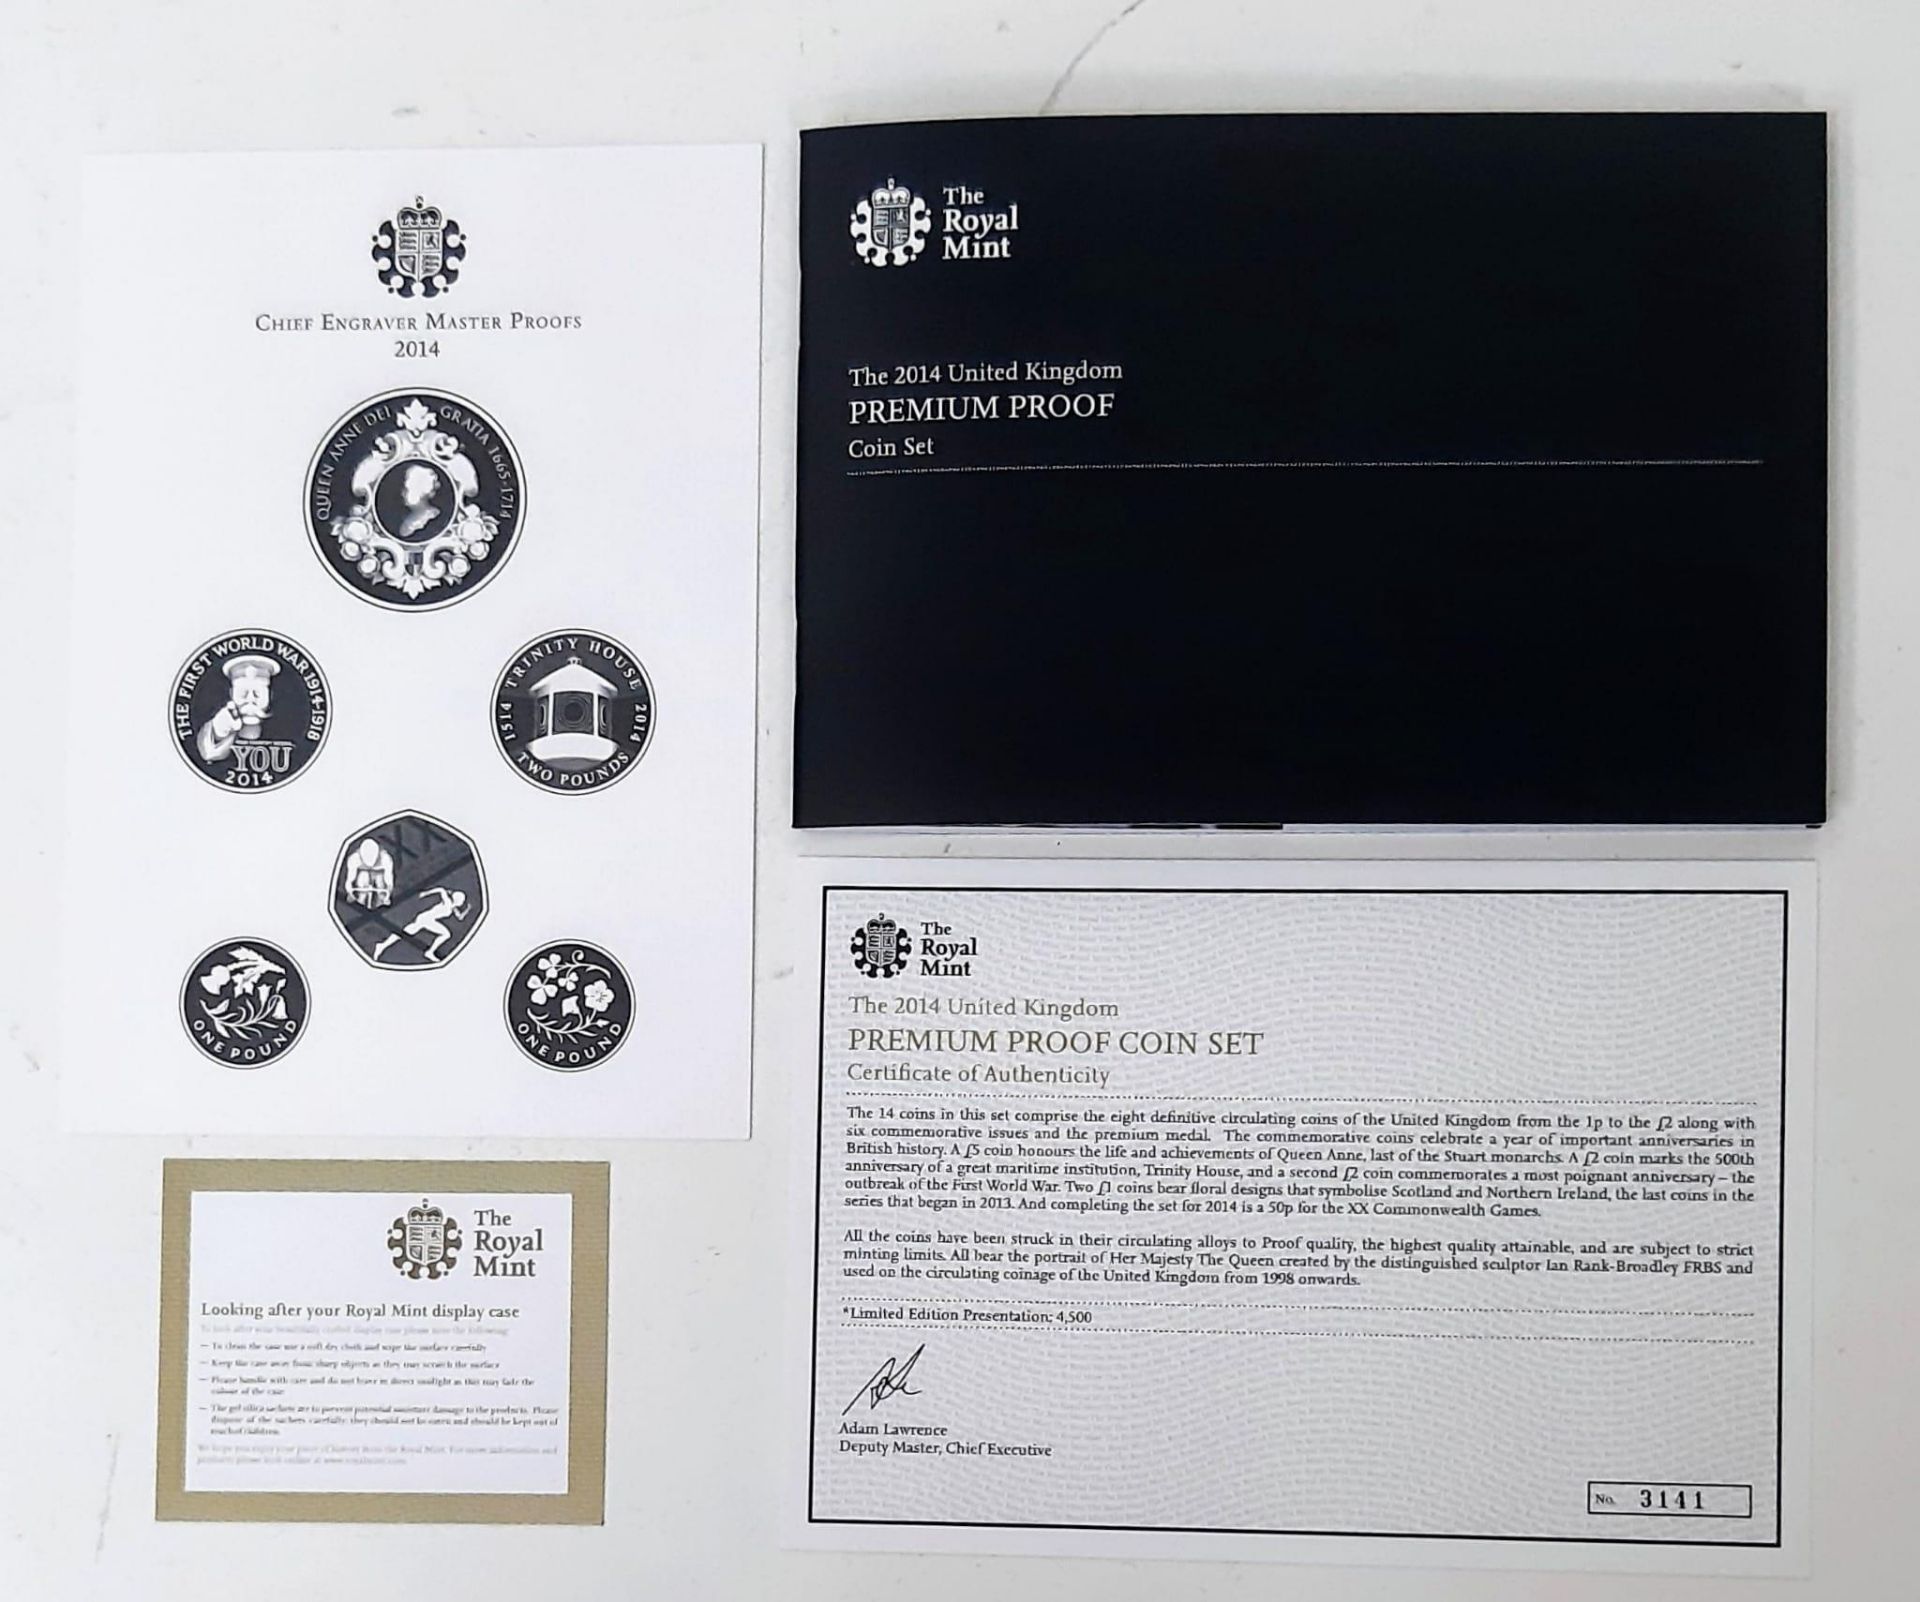 The Royal Mint 2014 United Kingdom Premium Proof 15 Coin Set. Slight marks on exterior box but the - Image 3 of 8